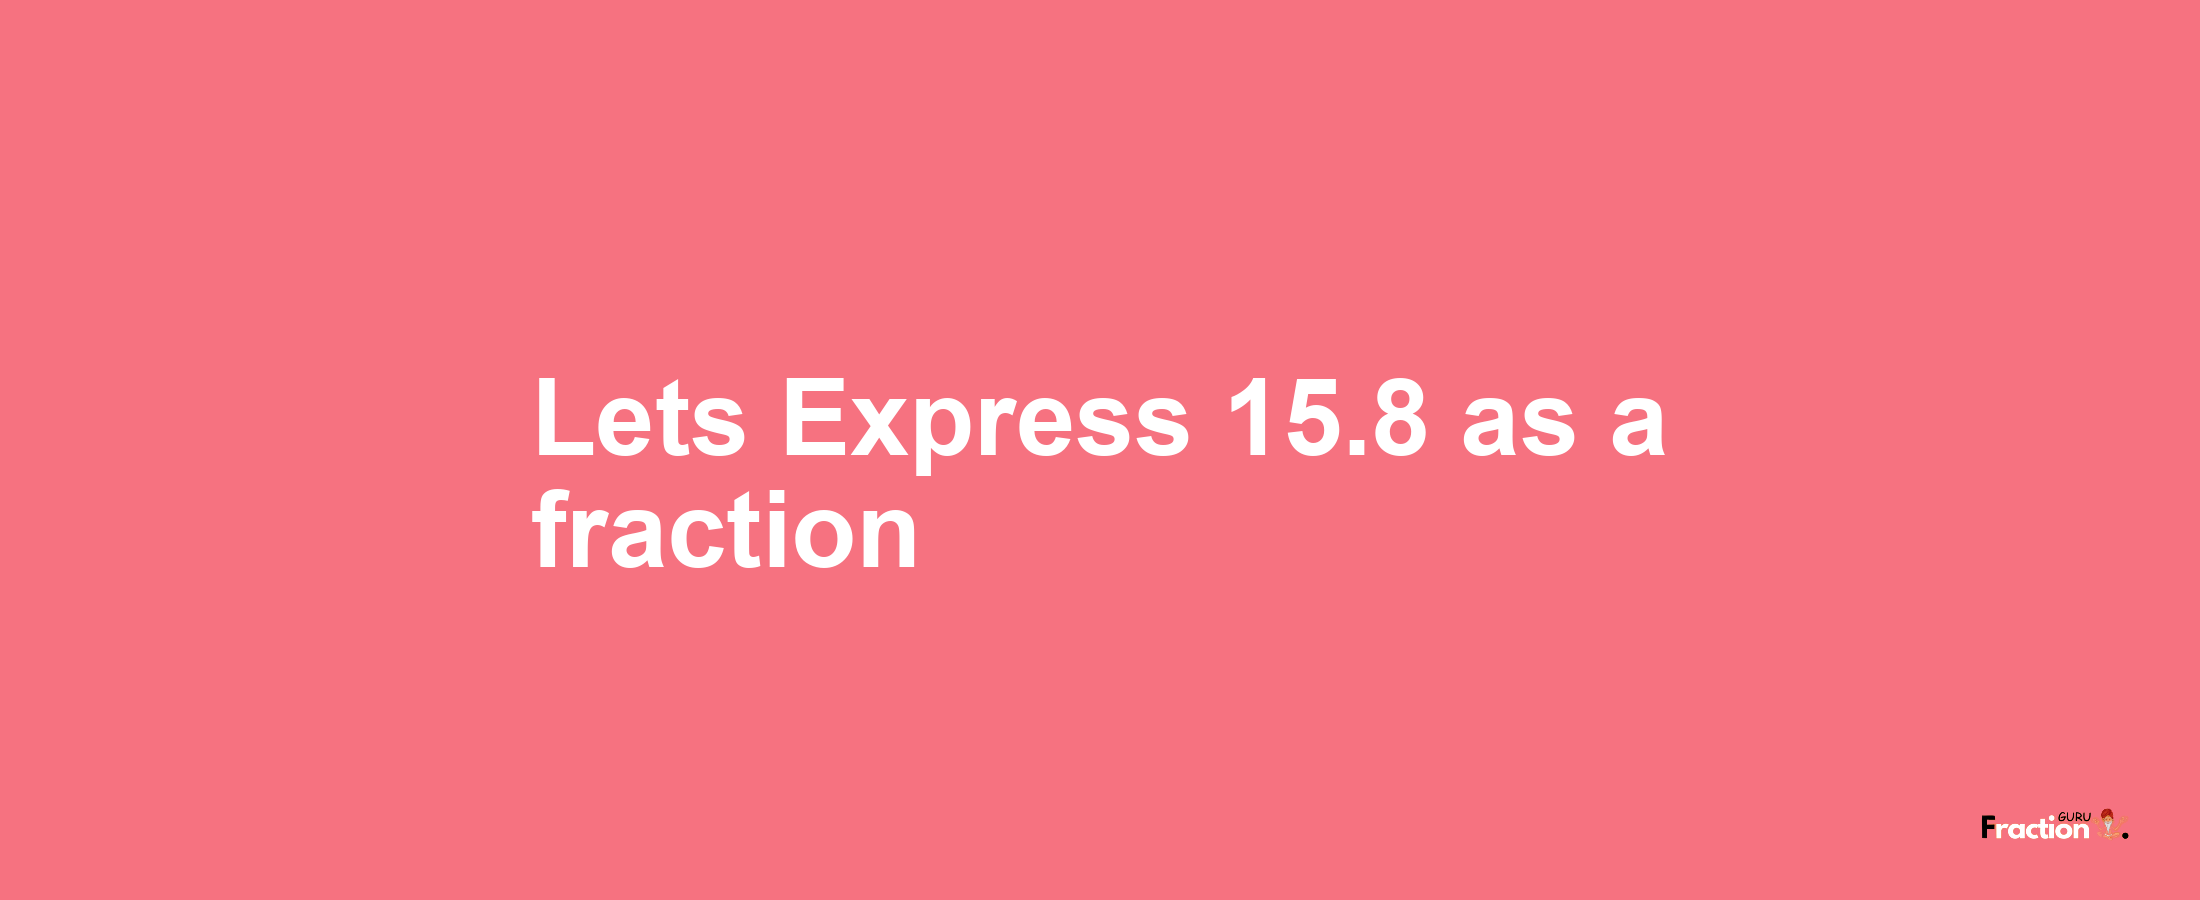 Lets Express 15.8 as afraction